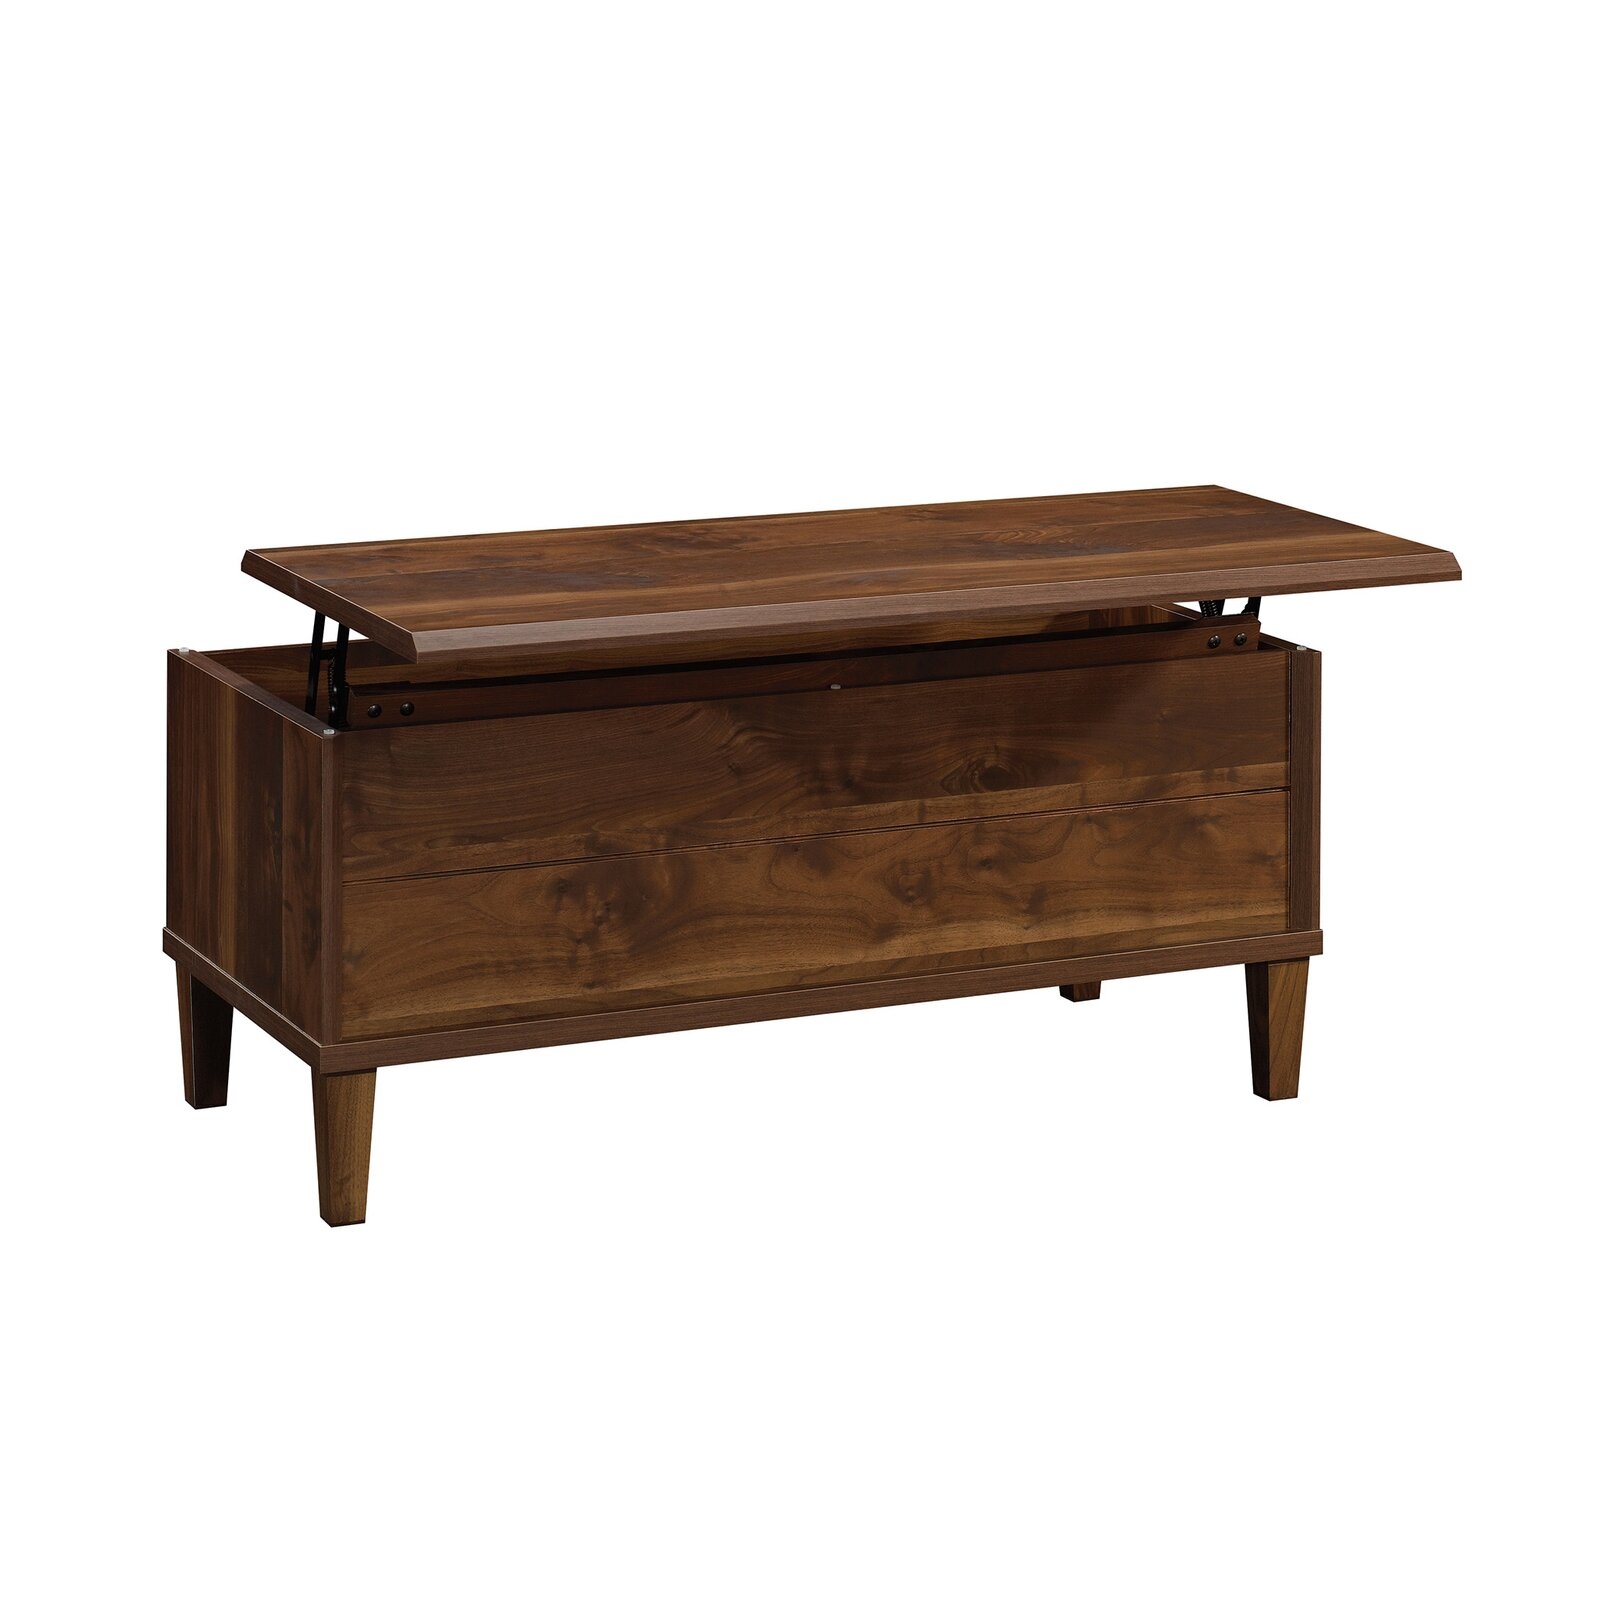 Cassano Lift Top Coffee Table with Storage - Image 1